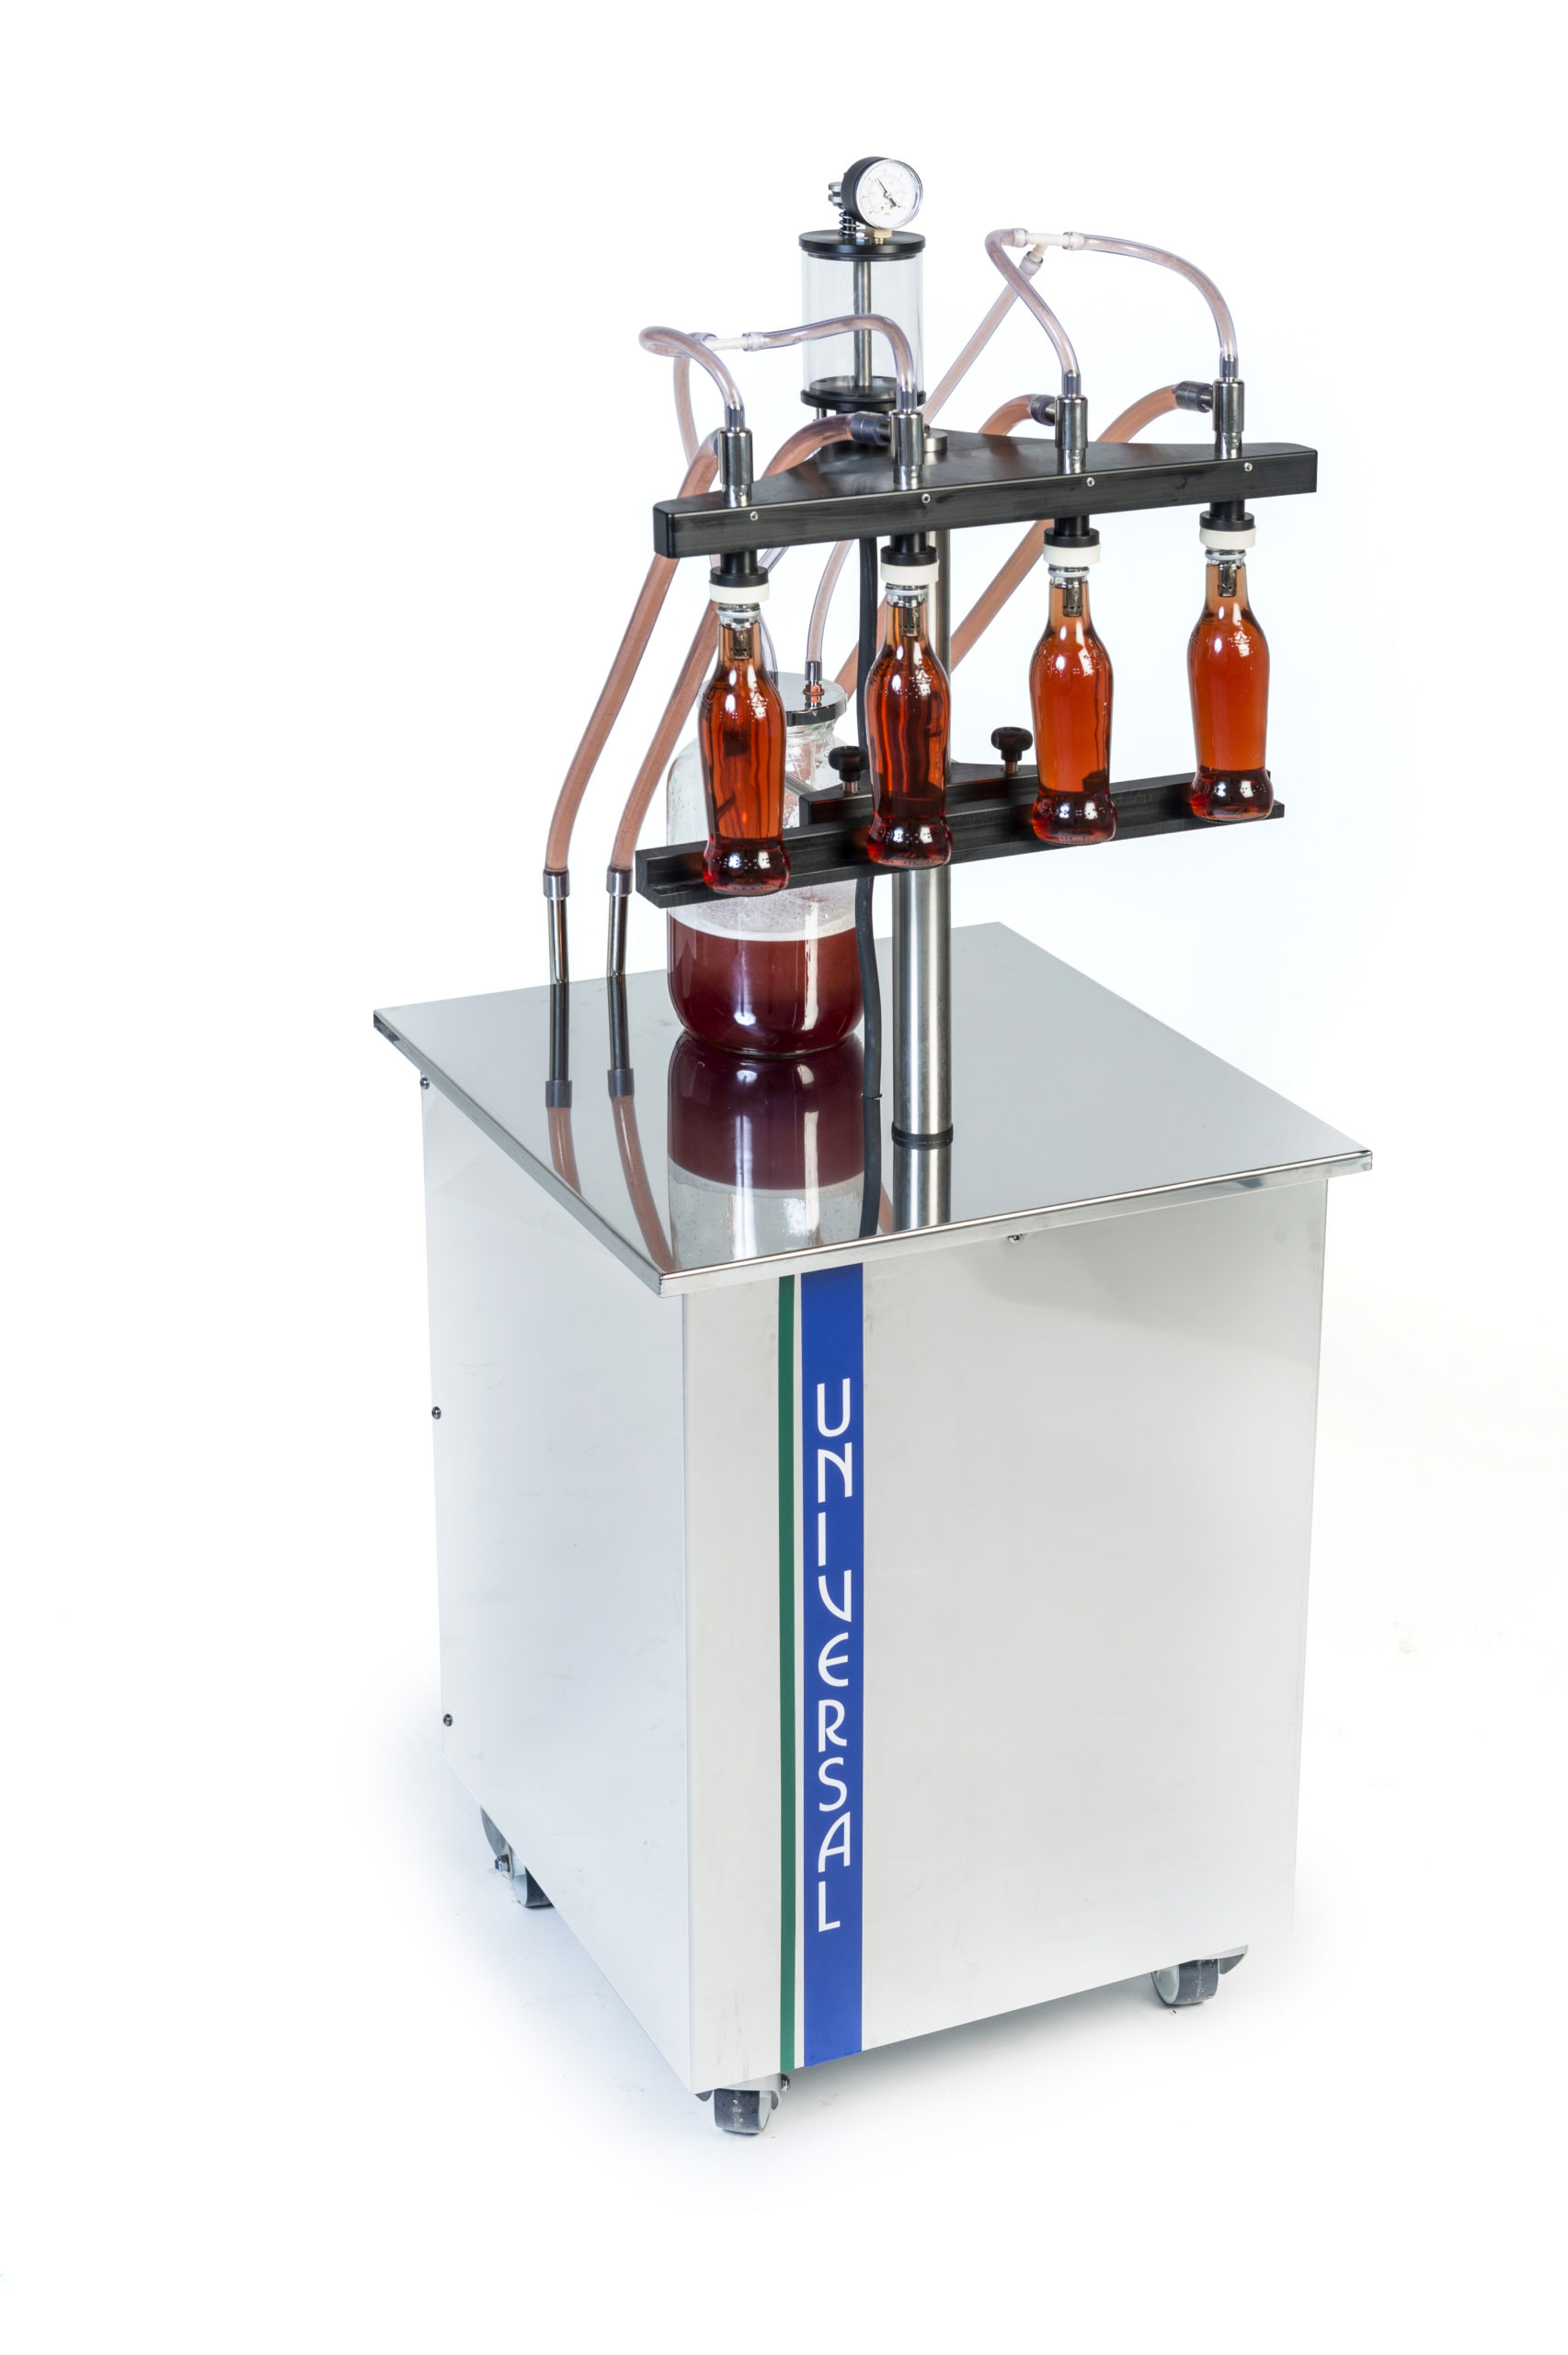 Easifill - liquid filling machine from Universal Filling Machine Co.